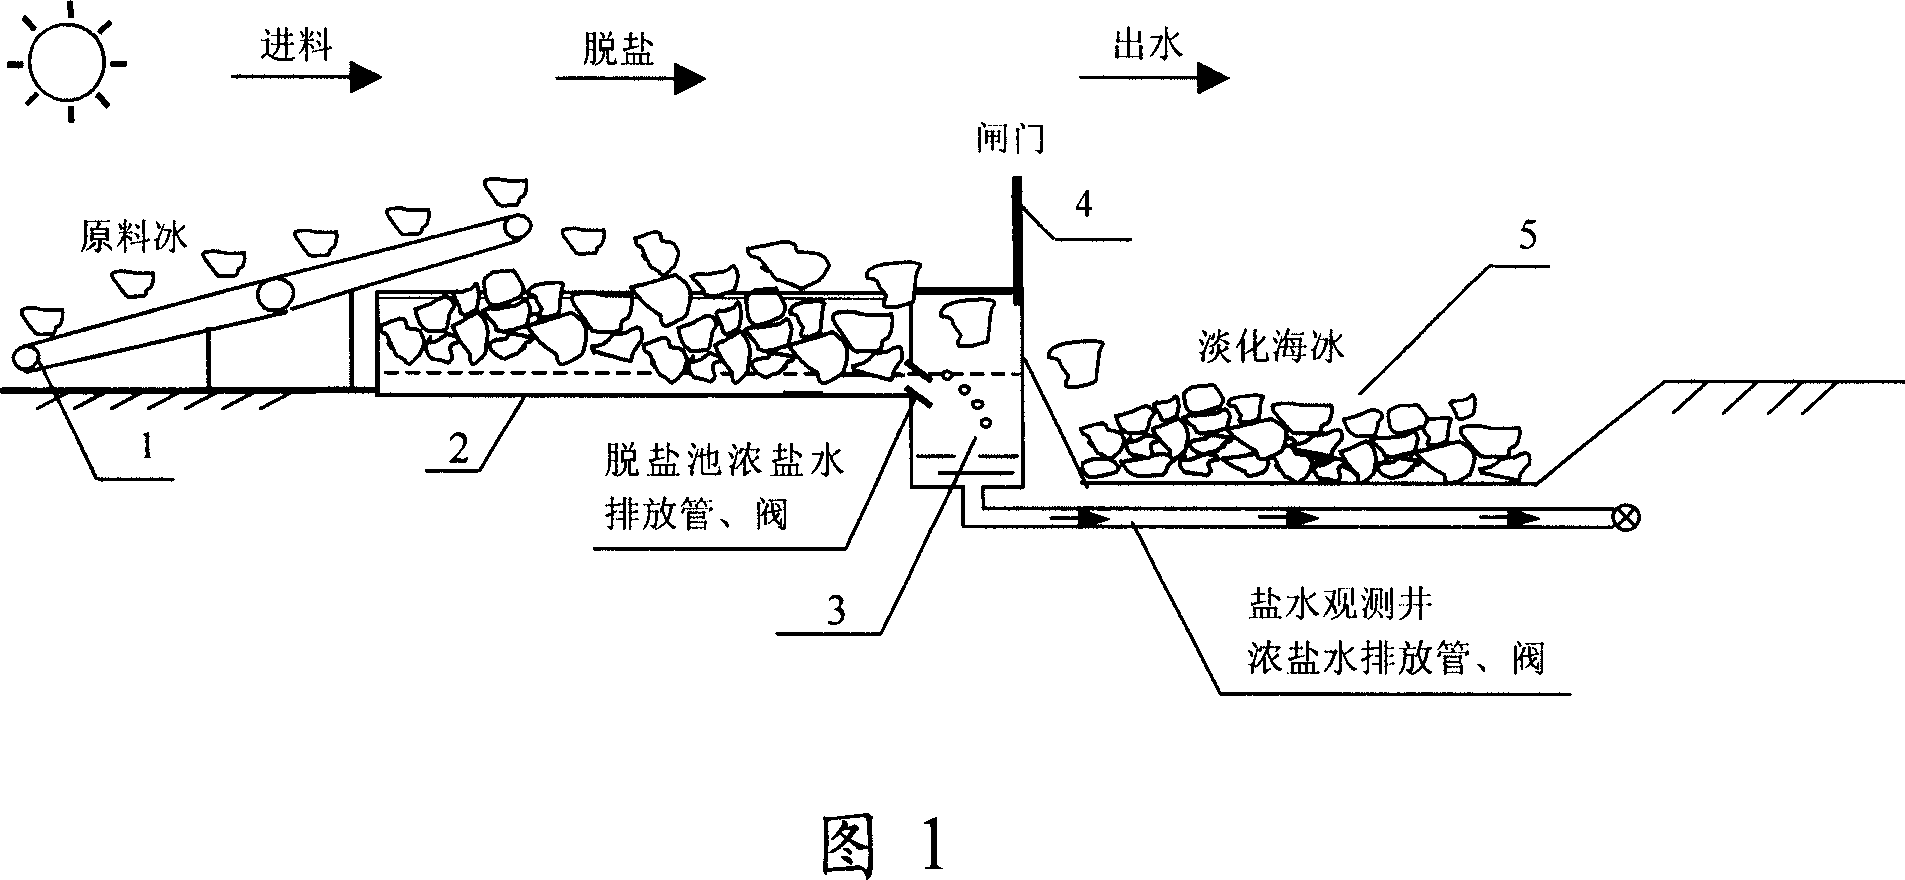 Sea ice desalinization facilities with gravity method and sea ice solid-state gravity desalinization method